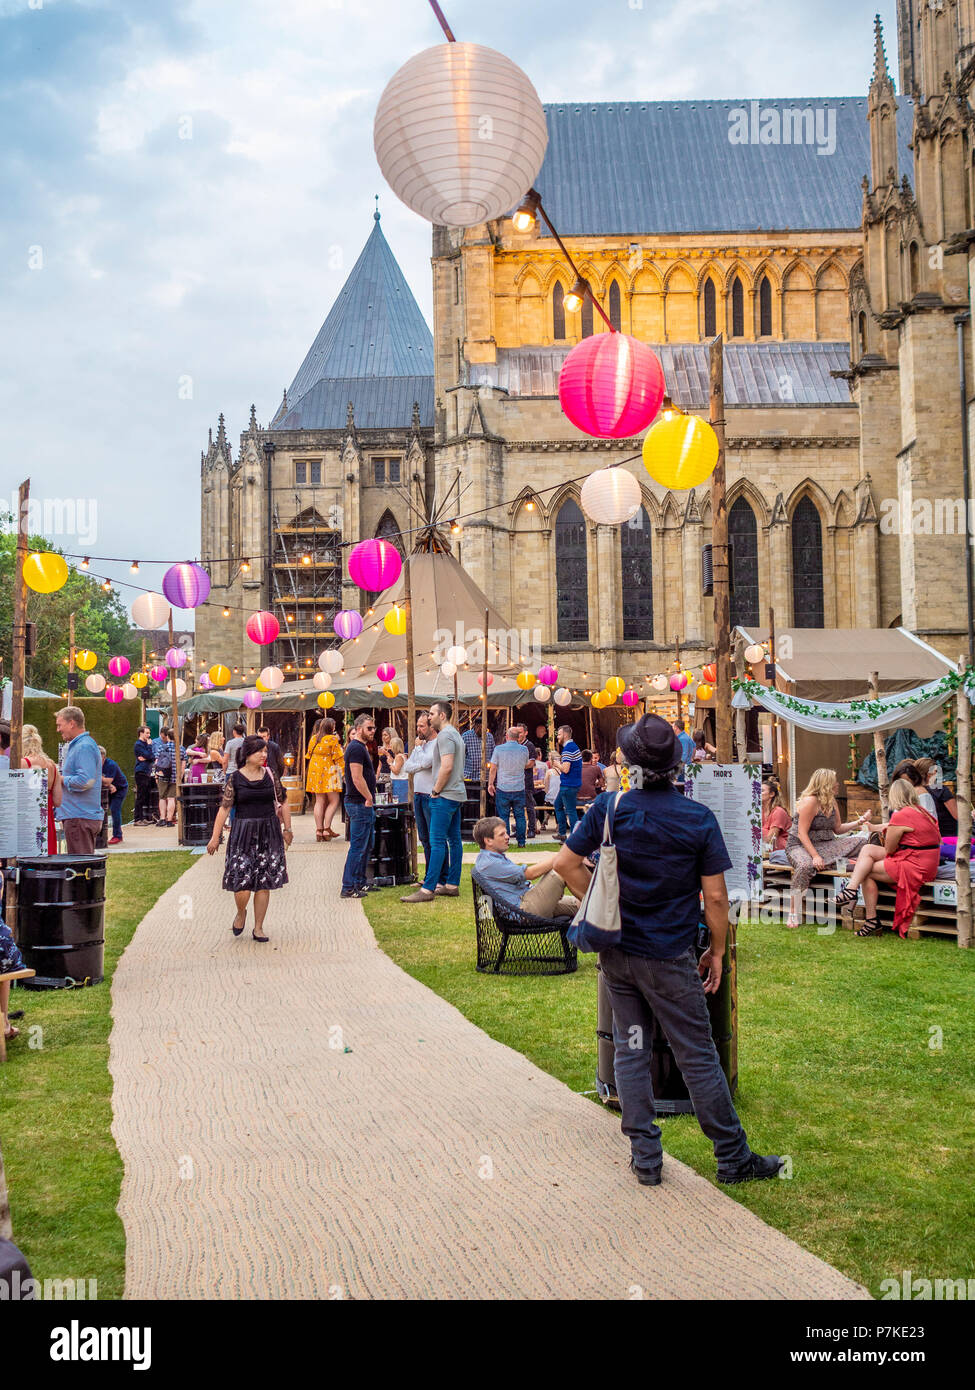 York, UK. 6th July 2018. SÓL ÁST – the pop-up bar with a summery vibe – begins a two month residency in the shadows of York Minster. Two linked canvas tipis adorned with greenery and lanterns form the unique venue, combining indoor cosiness with a unique summer theme set against one of the world’s most spectacular gothic backdrops. The event is part of the “Summer in the Park: Heart of Yorkshire” festival that is being hosted the Dean’s Park by York Minster throughout the summer. Credit: Bailey-Cooper Photography/Alamy Live News Stock Photo